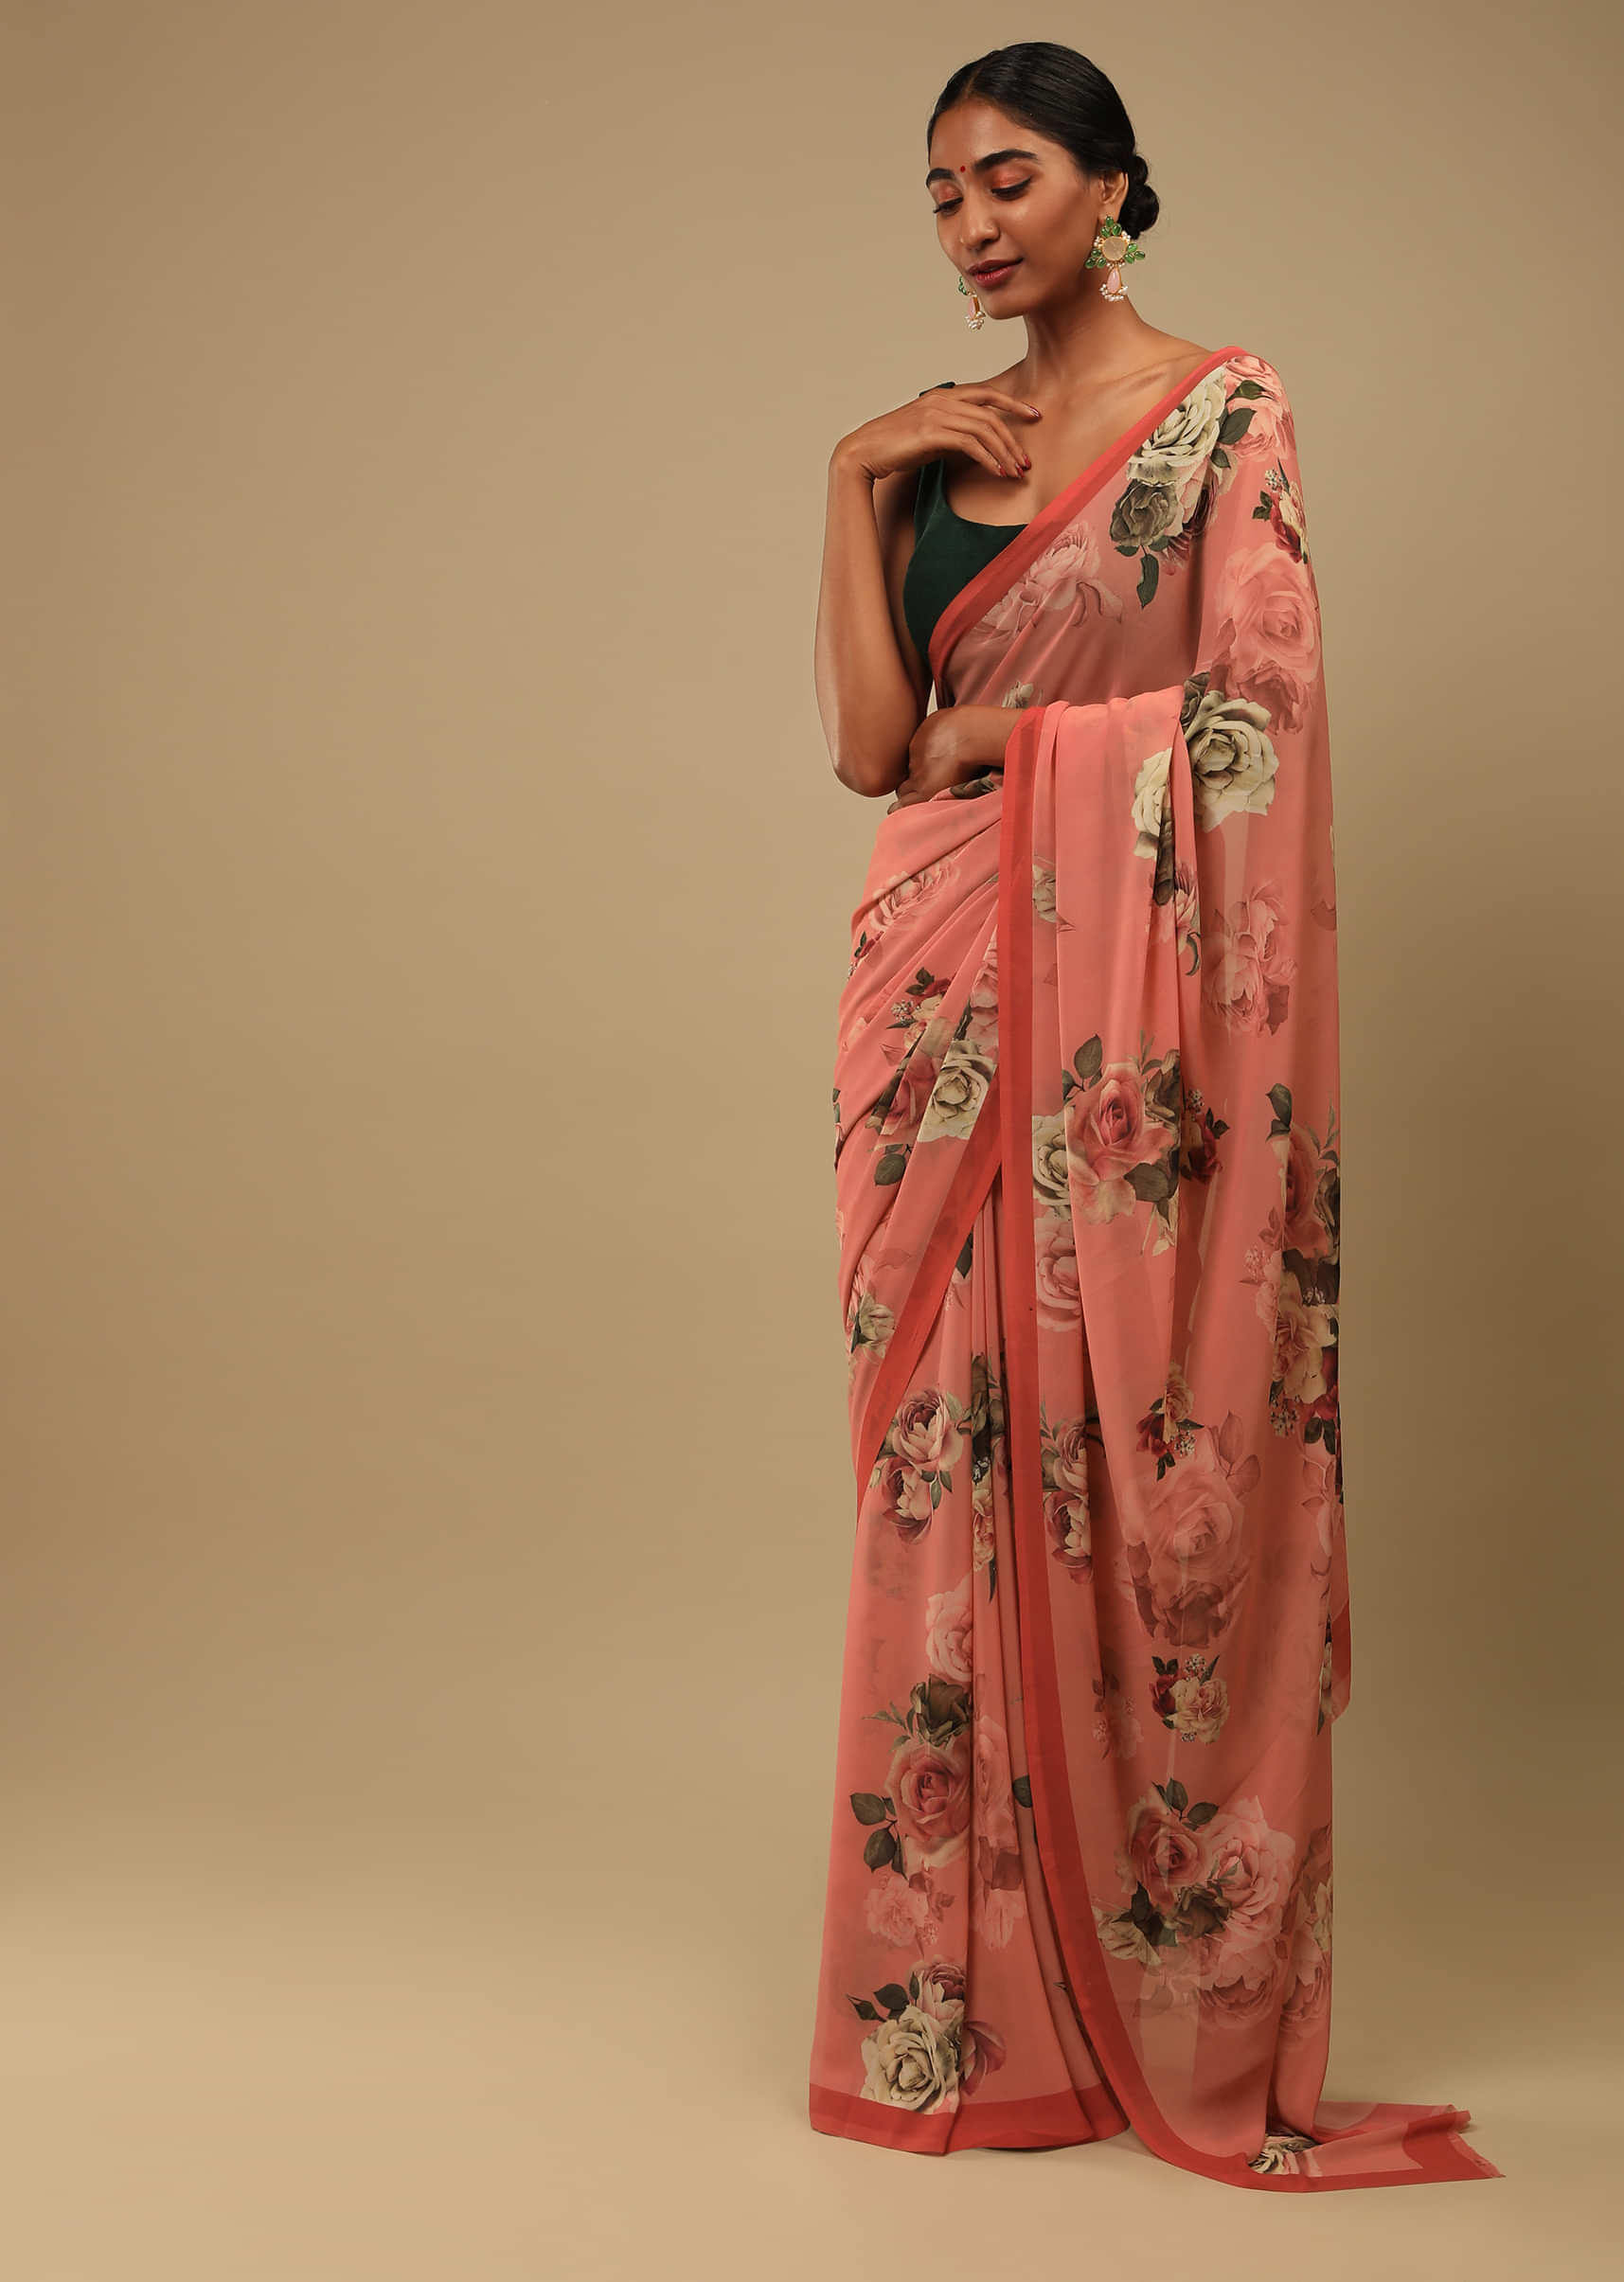 Reddish Peach Saree In Crepe Georgette With Printed Rose Motifs And Unstitched Blouse  